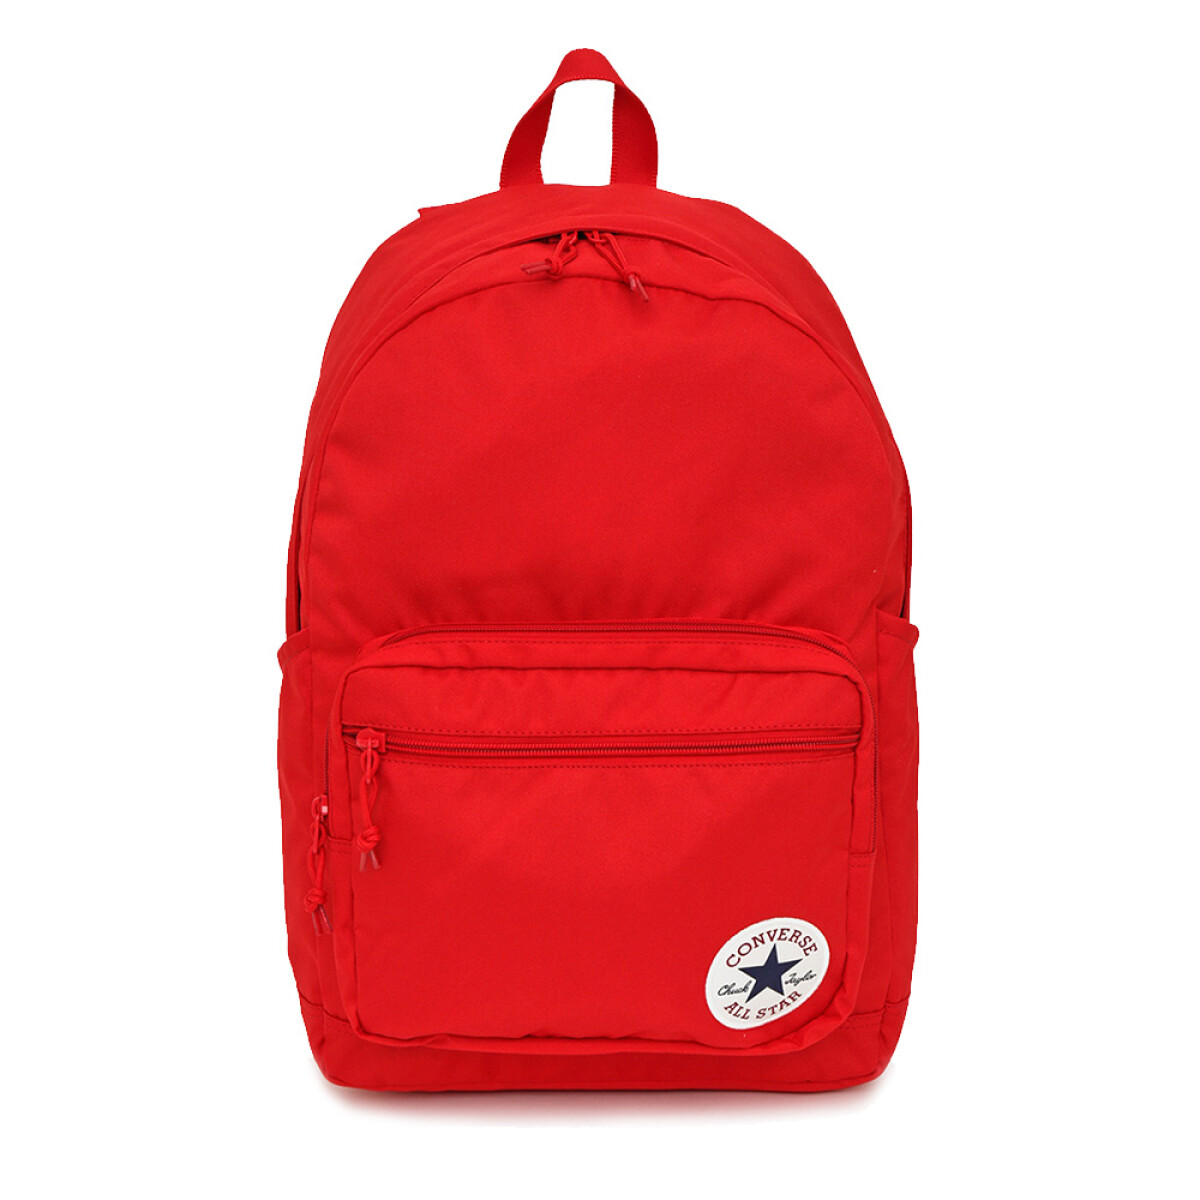 STRAIGHT EDGE BACKPACK - CONVERSE 